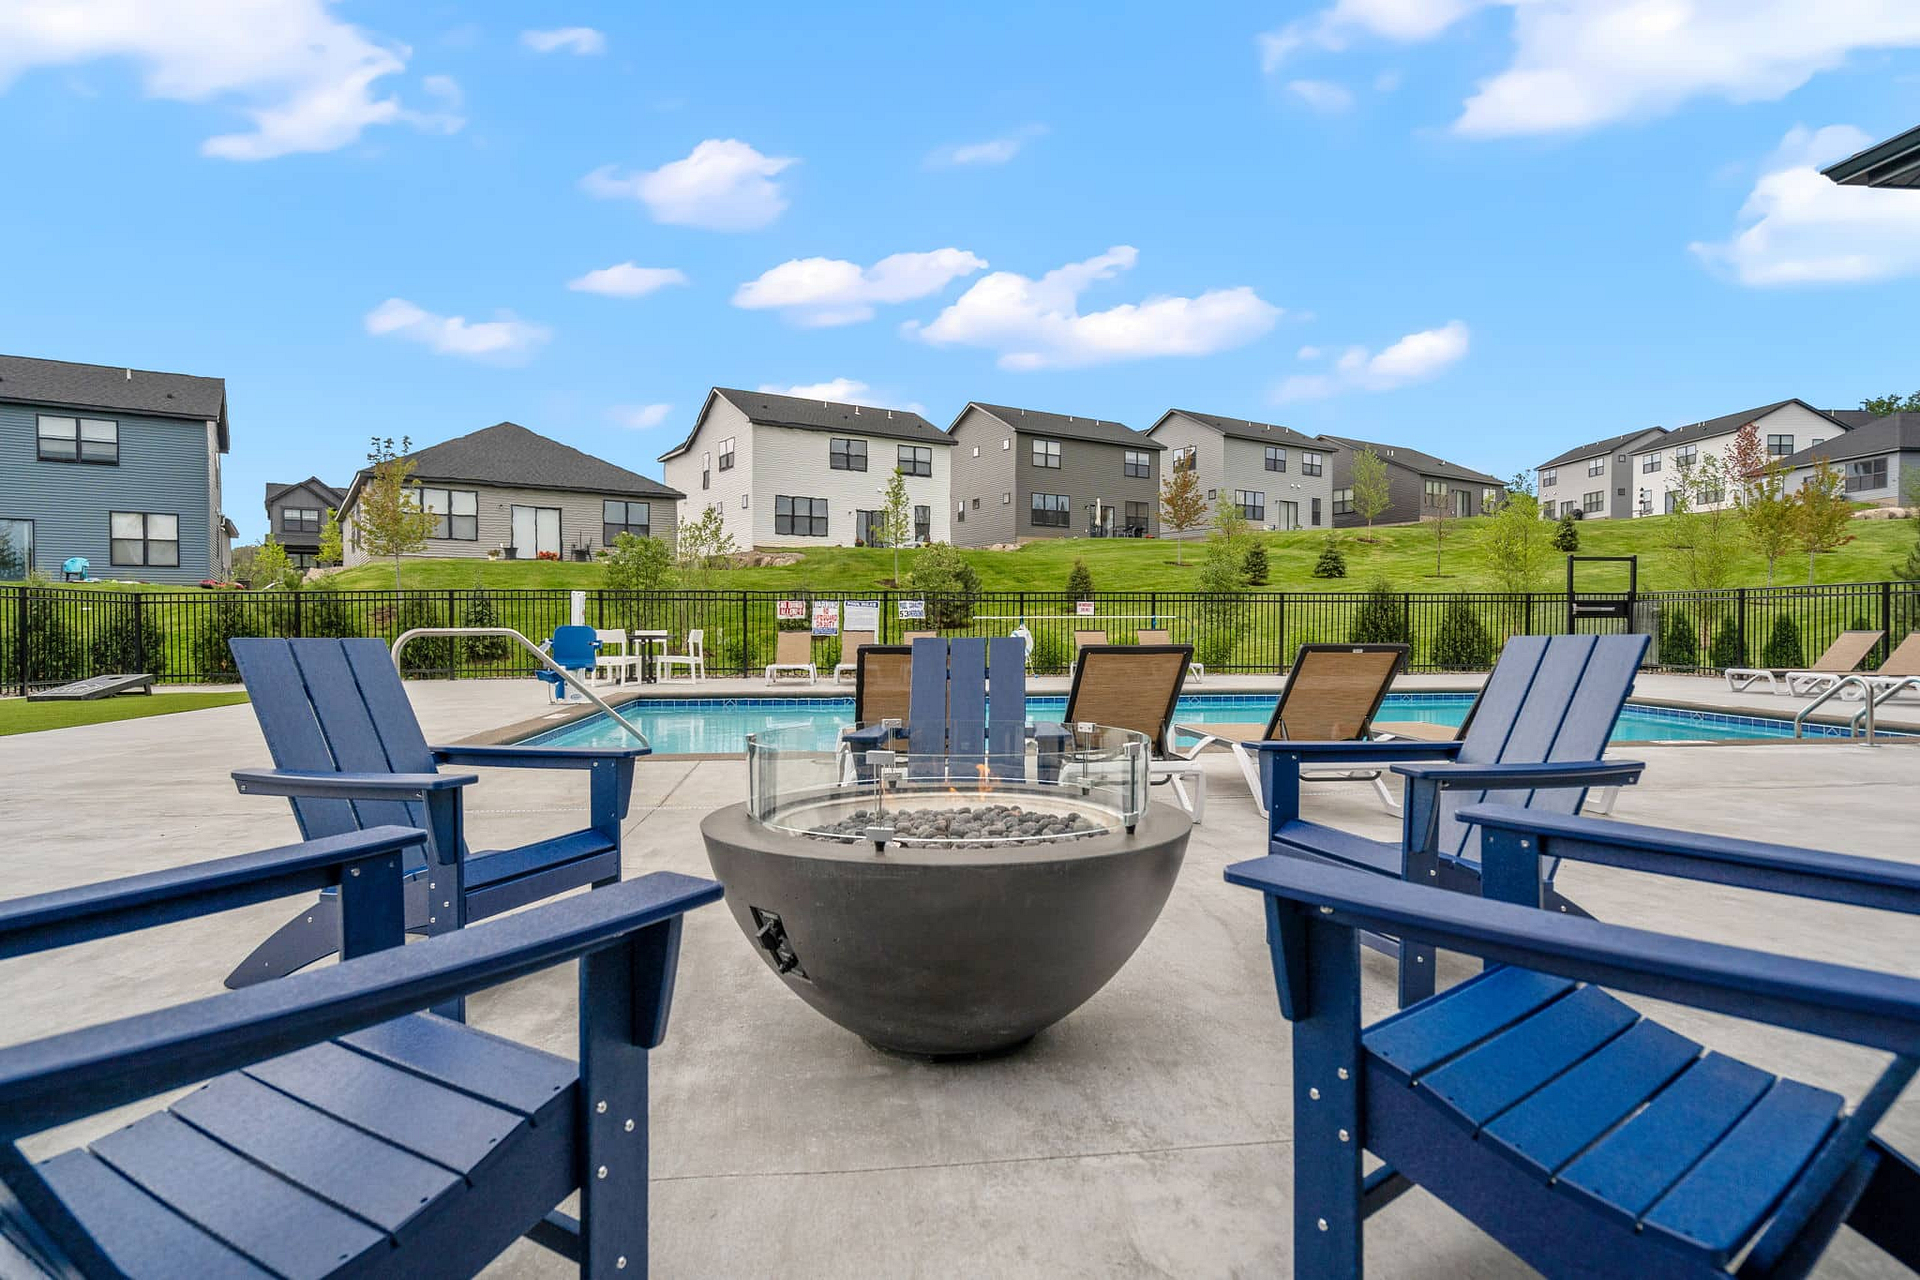 enjoy the sunshine by the fire pit and pool